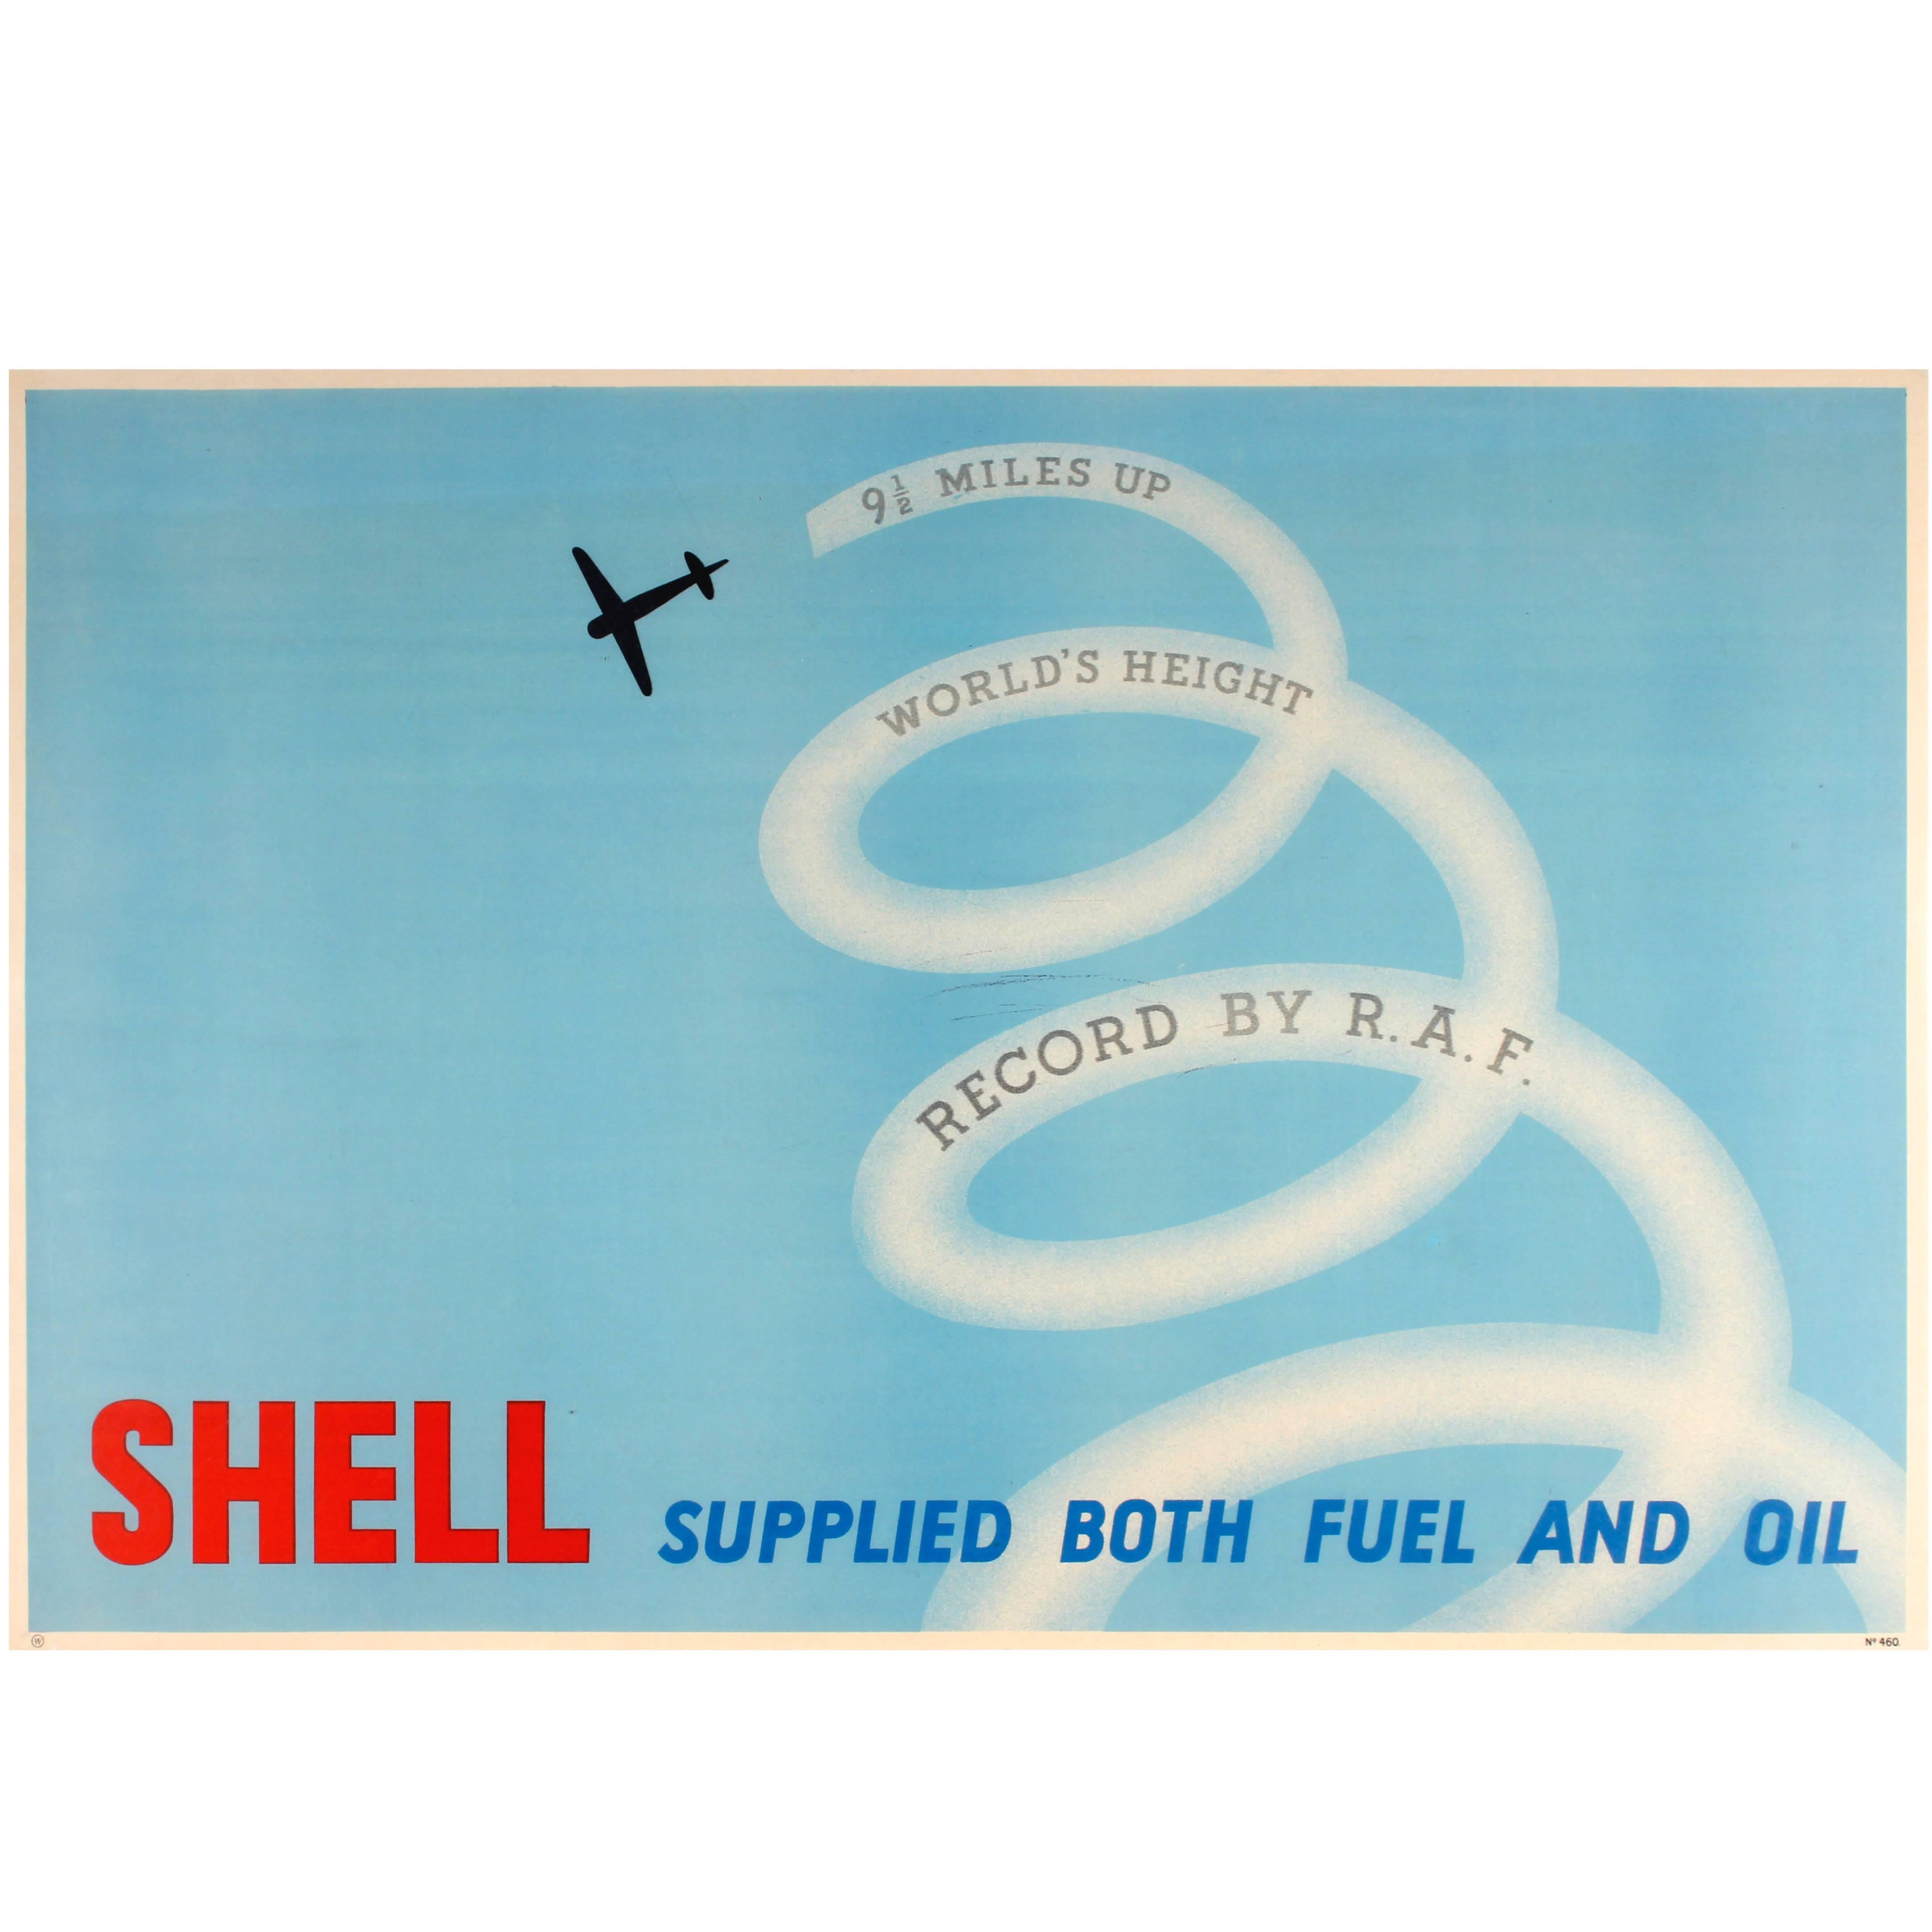 1930s Poster "9½ Miles Up World Height Record by RAF - Shell Oil & Fuel"